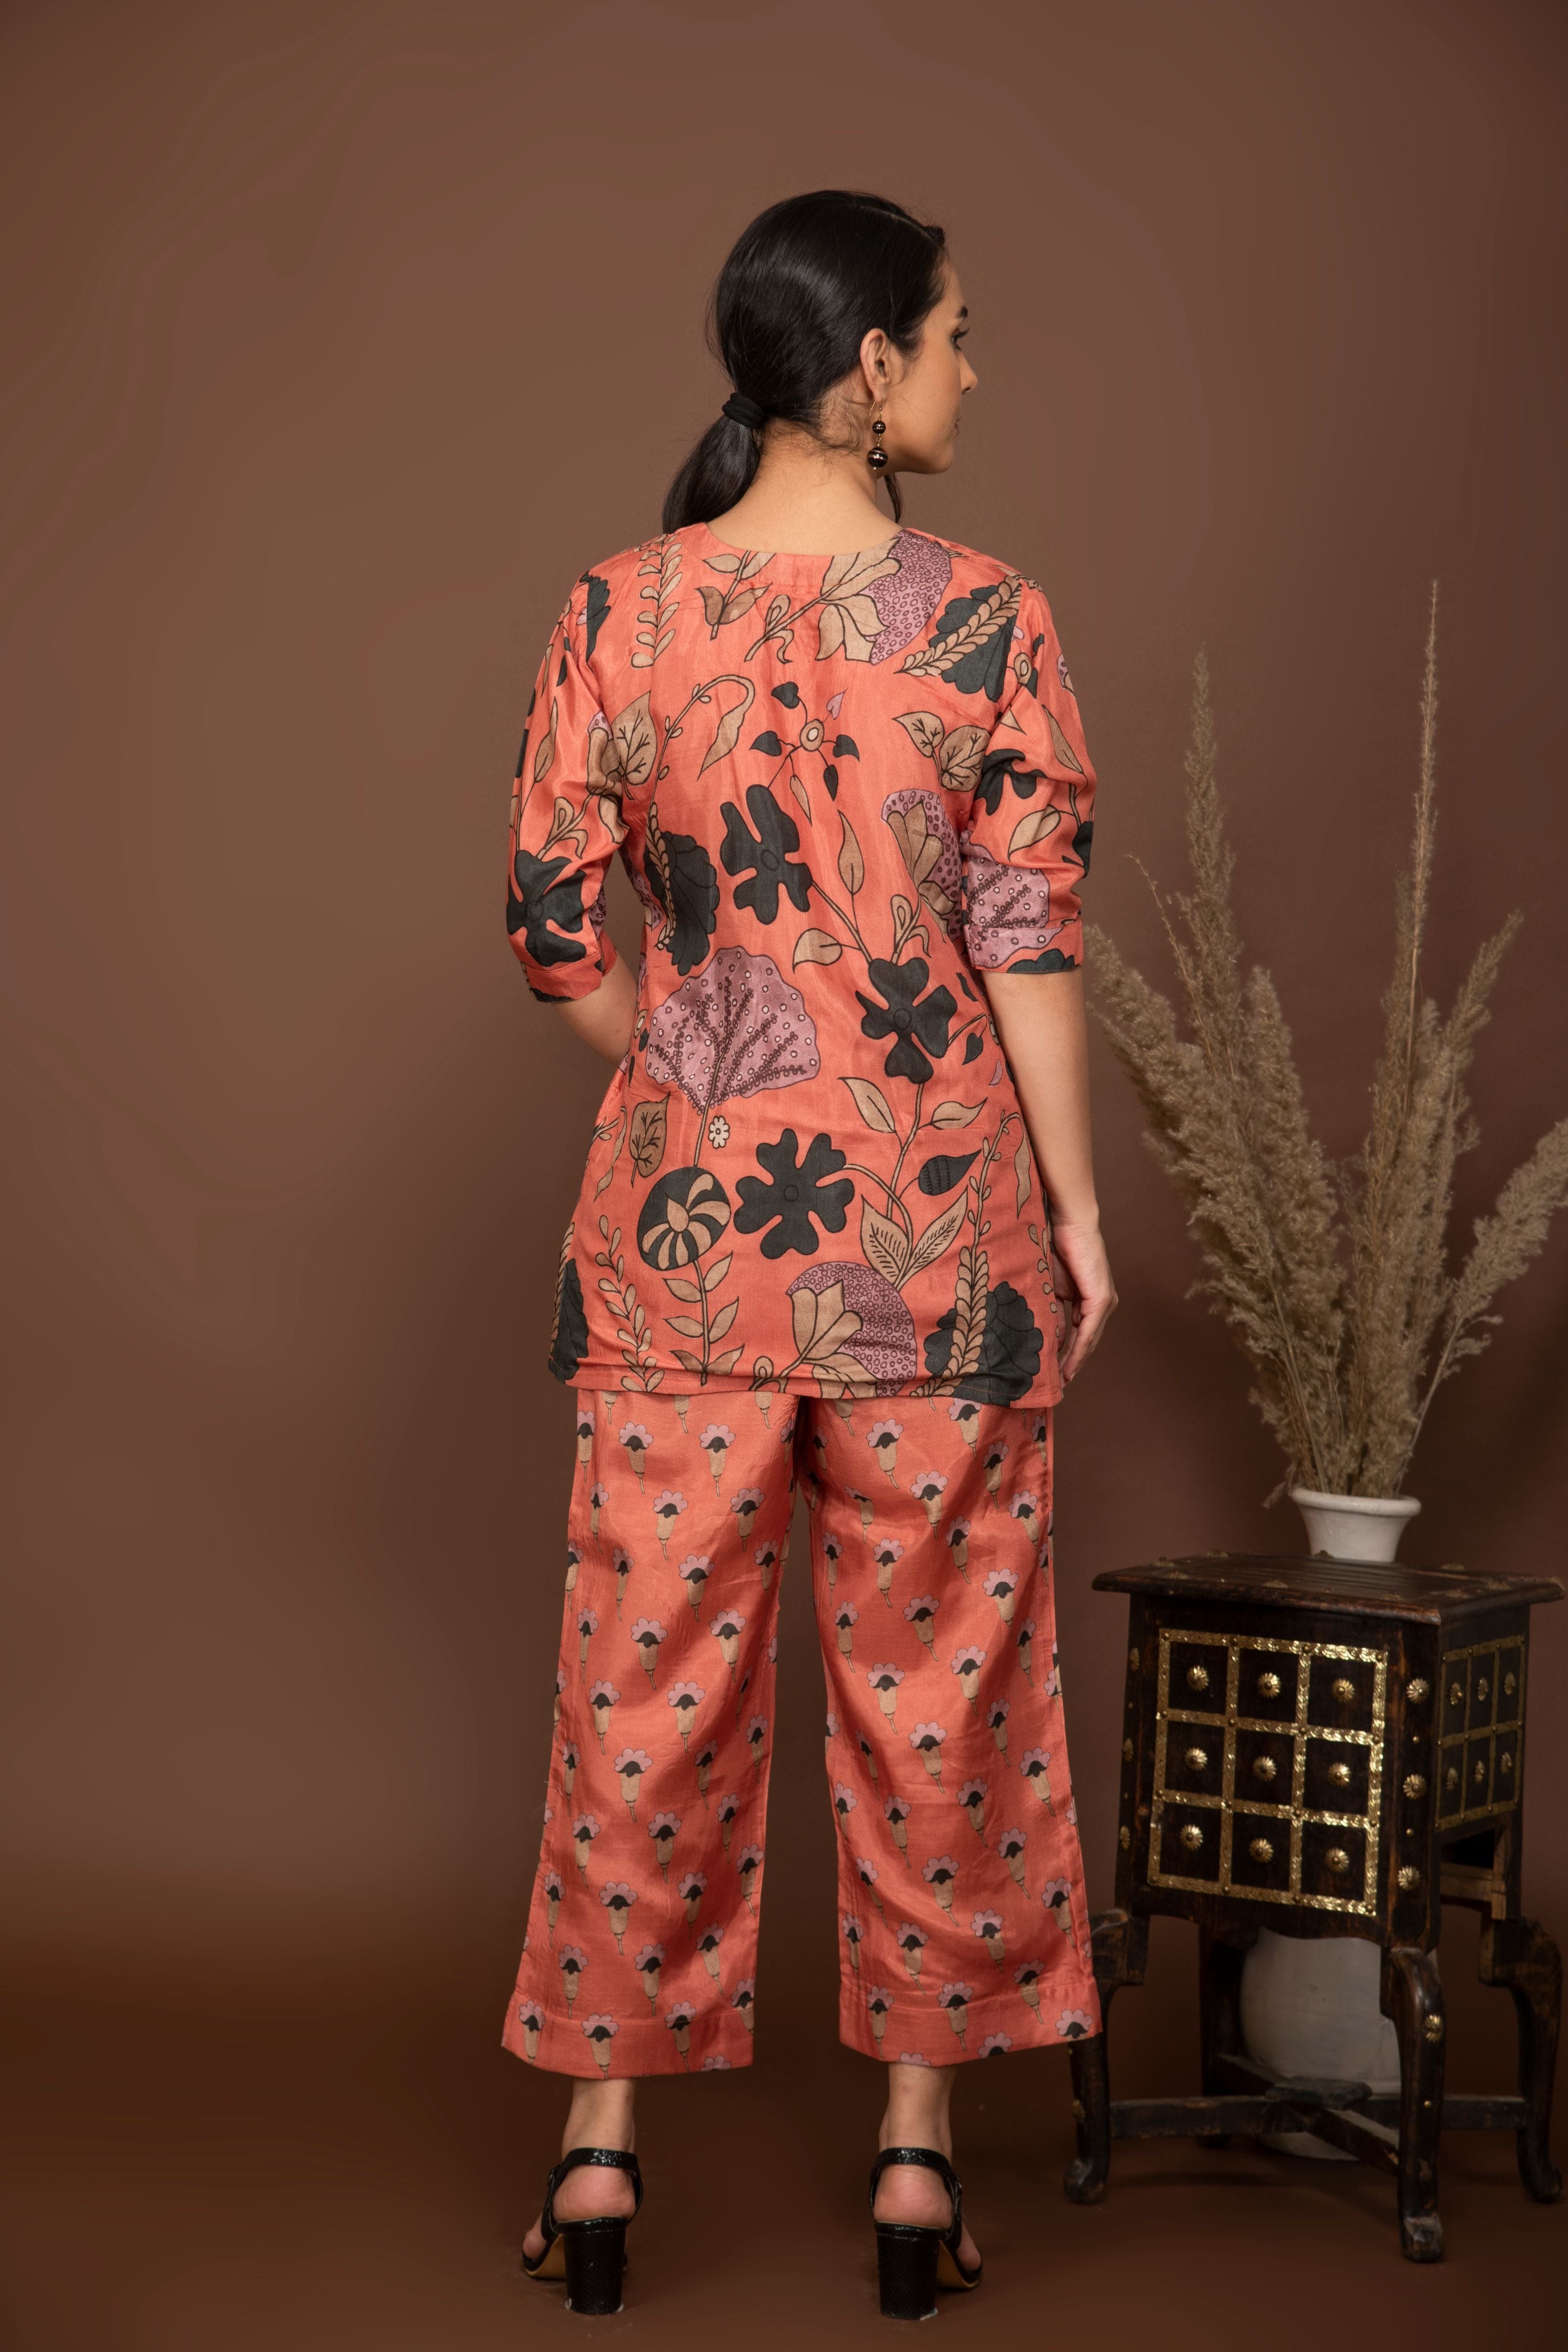 Peach soft muslin with bold flower printed top with butti printed bottom.